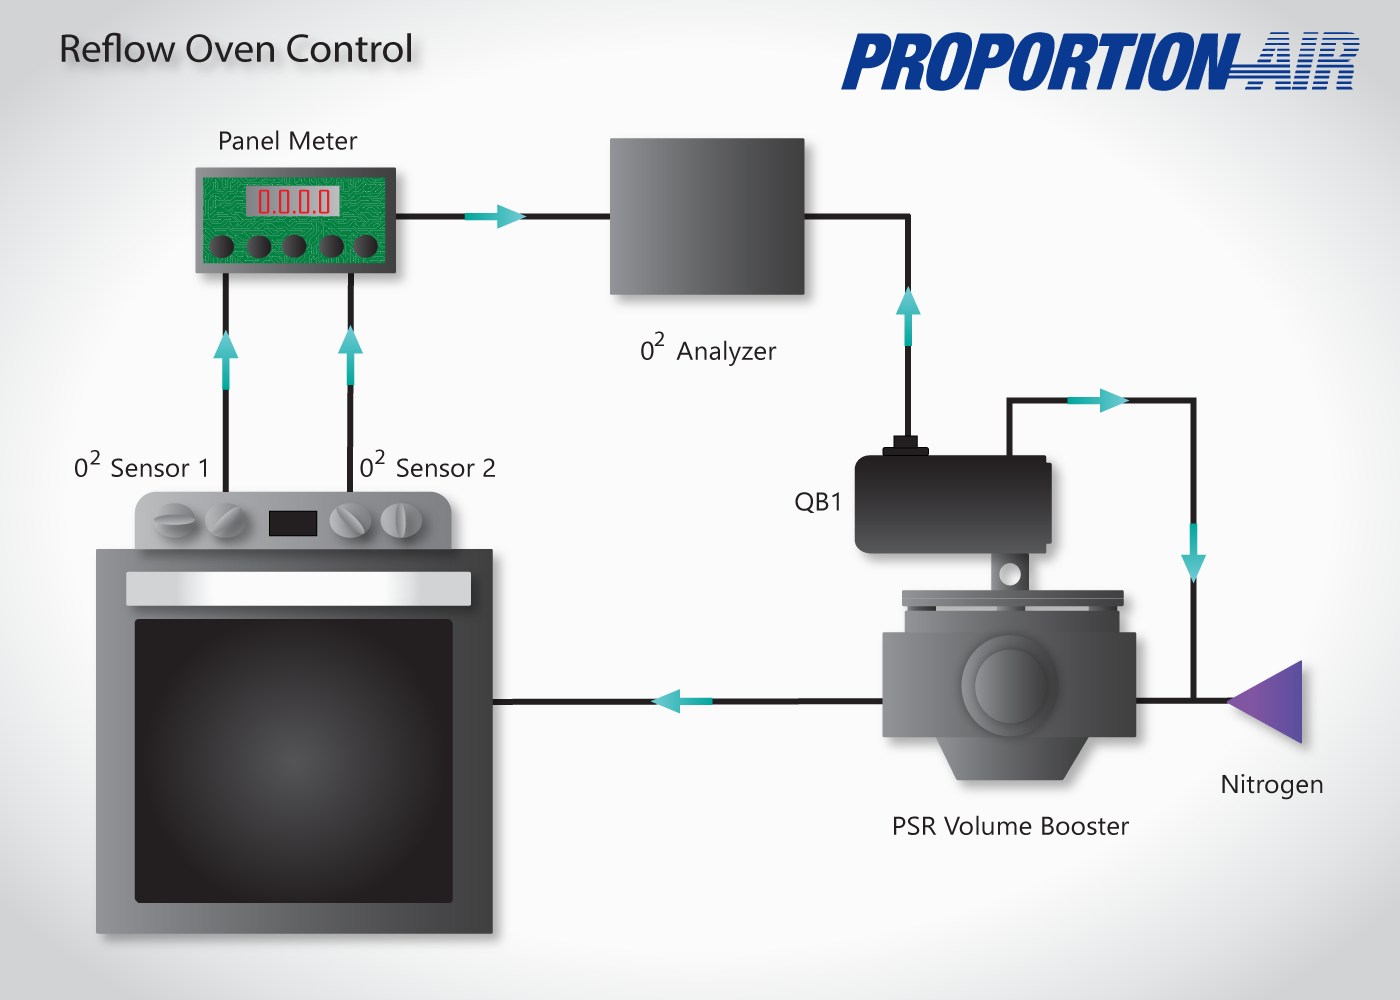 Reflow Oven Control with QB1/PSR